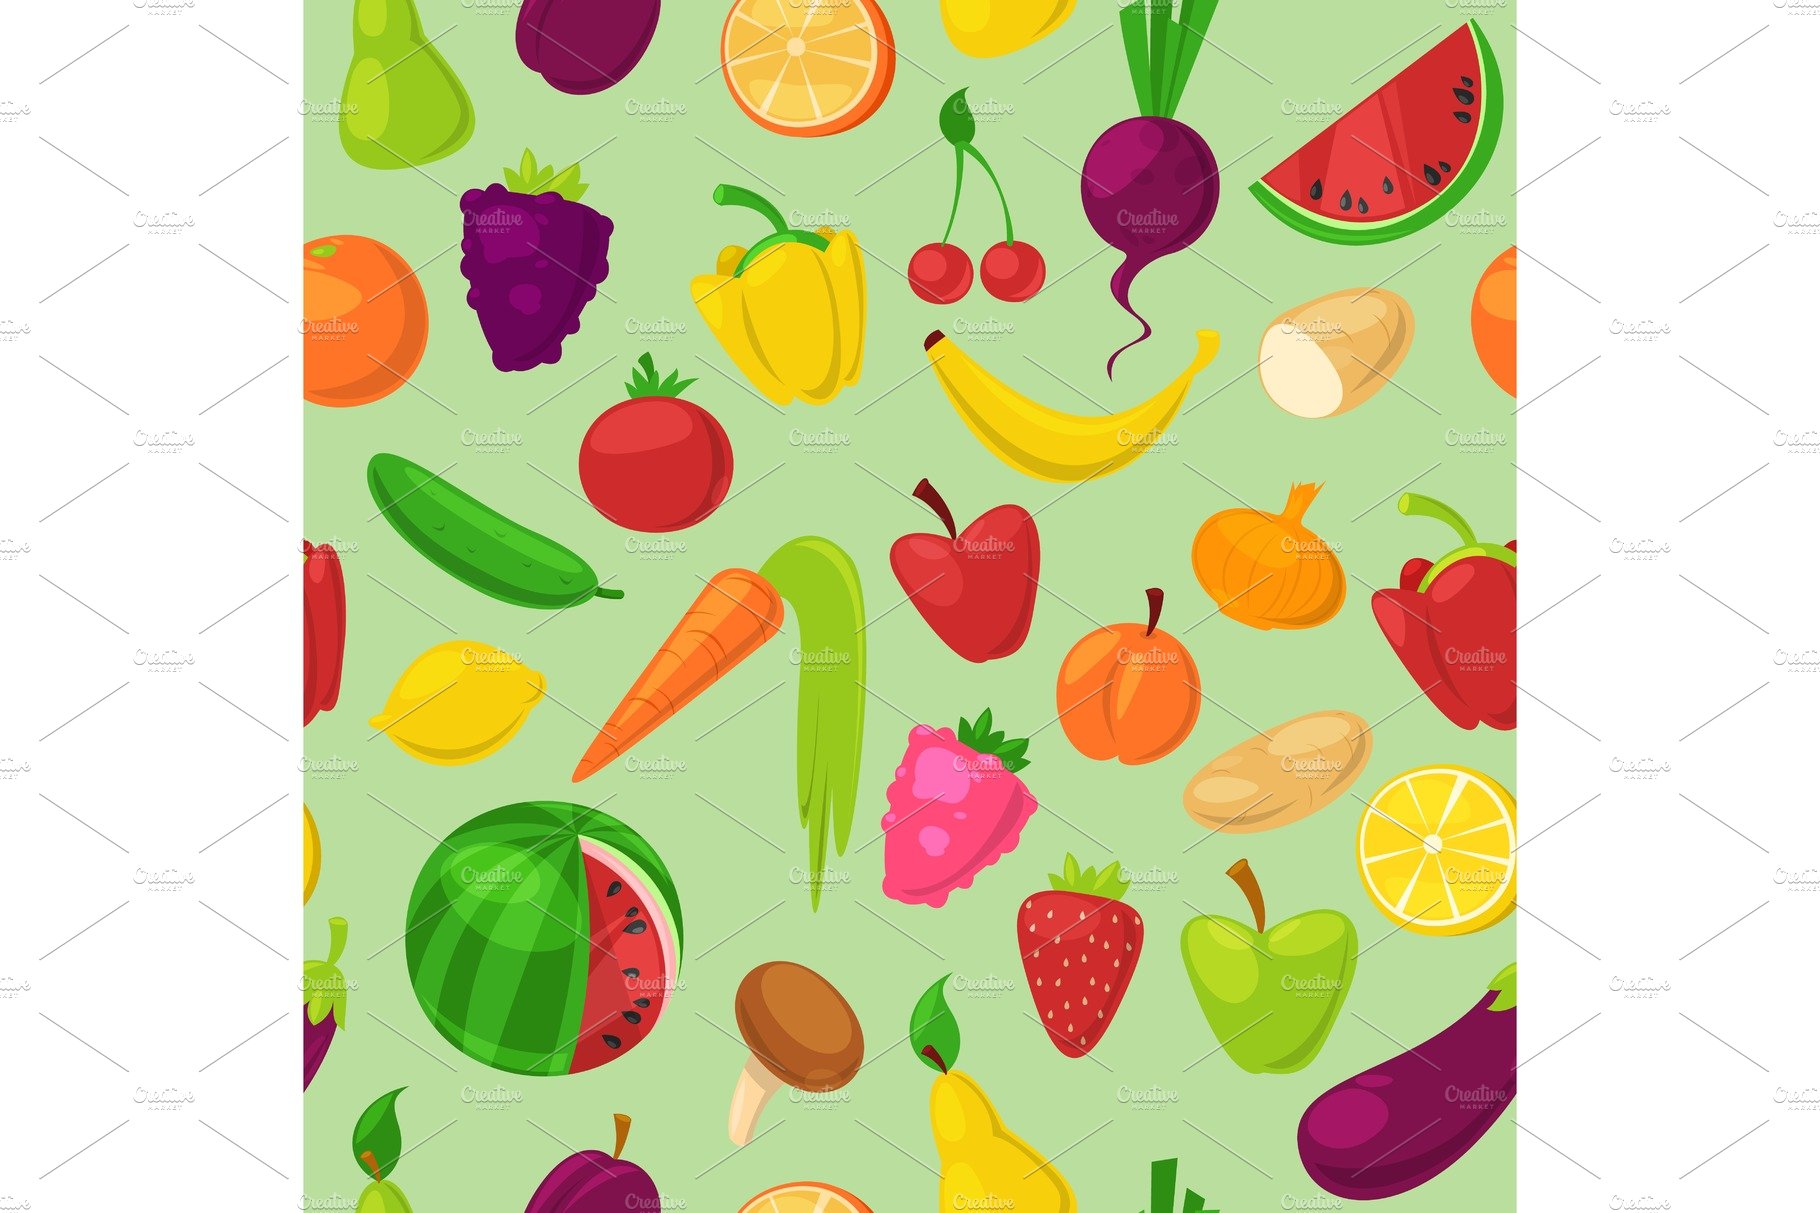 Fruits vegetables vector healthy cover image.